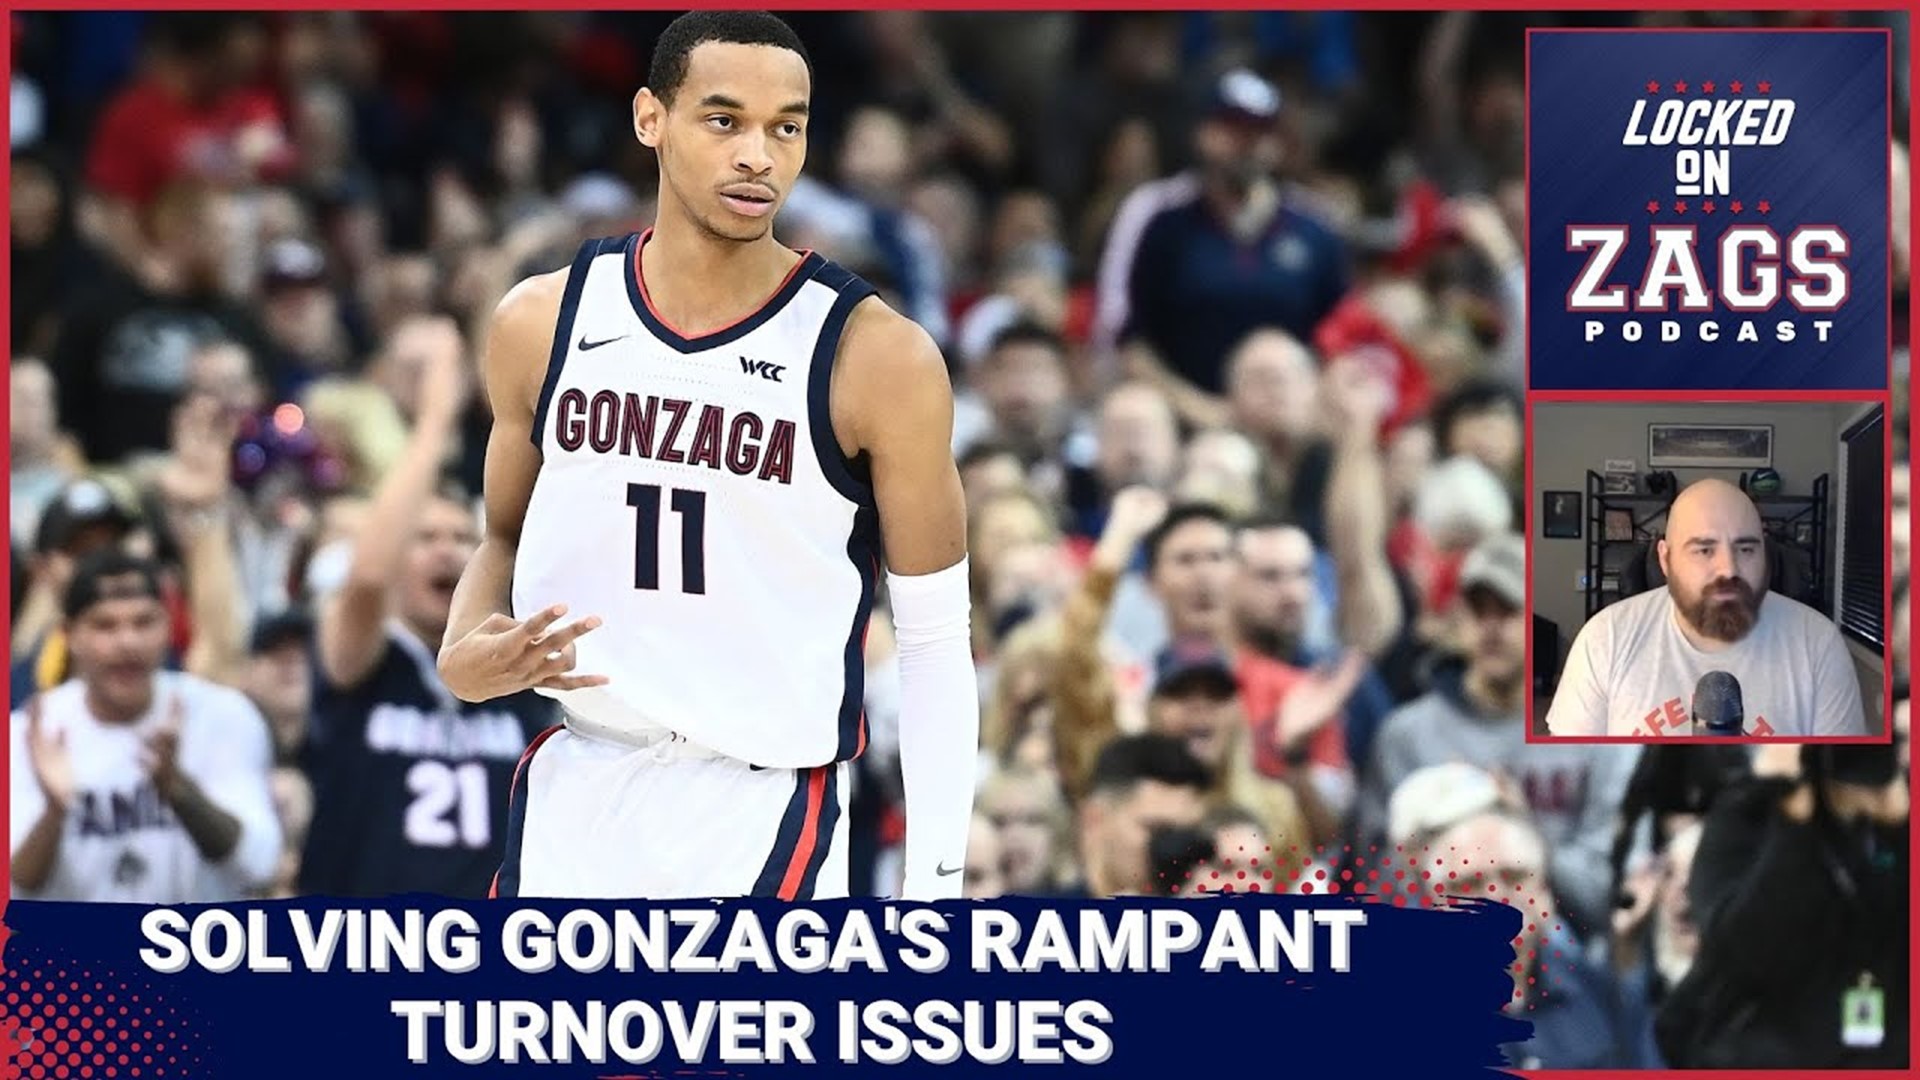 The Gonzaga Bulldogs are 3-1 after tough victories over Michigan State and Kentucky, but Mark Few's team still has one glaring issue: turnovers.